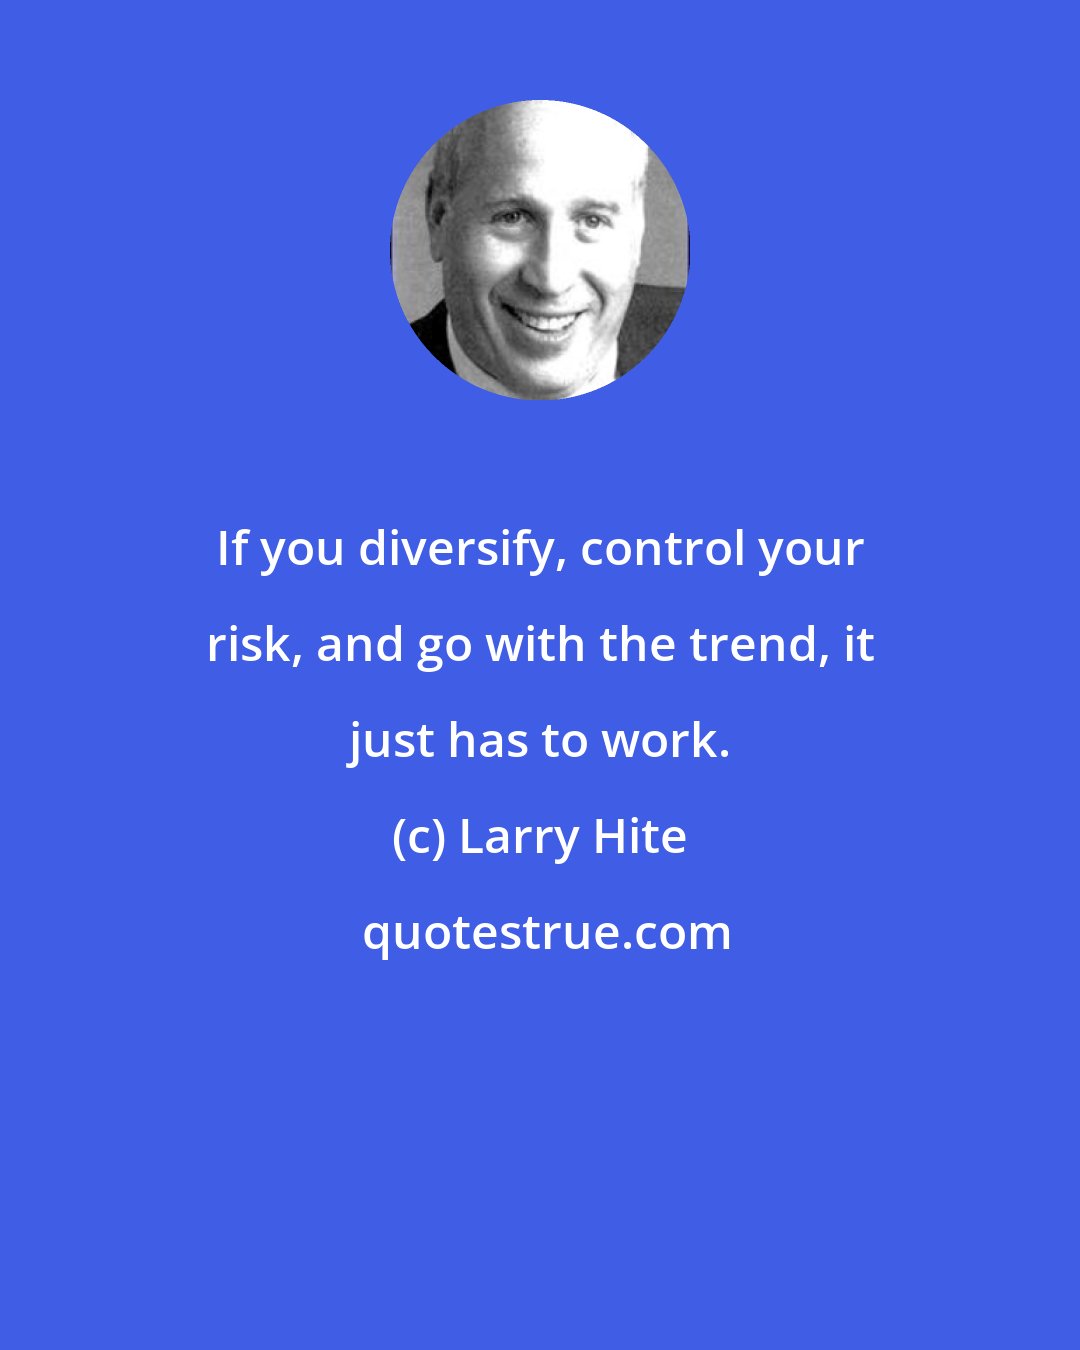 Larry Hite: If you diversify, control your risk, and go with the trend, it just has to work.